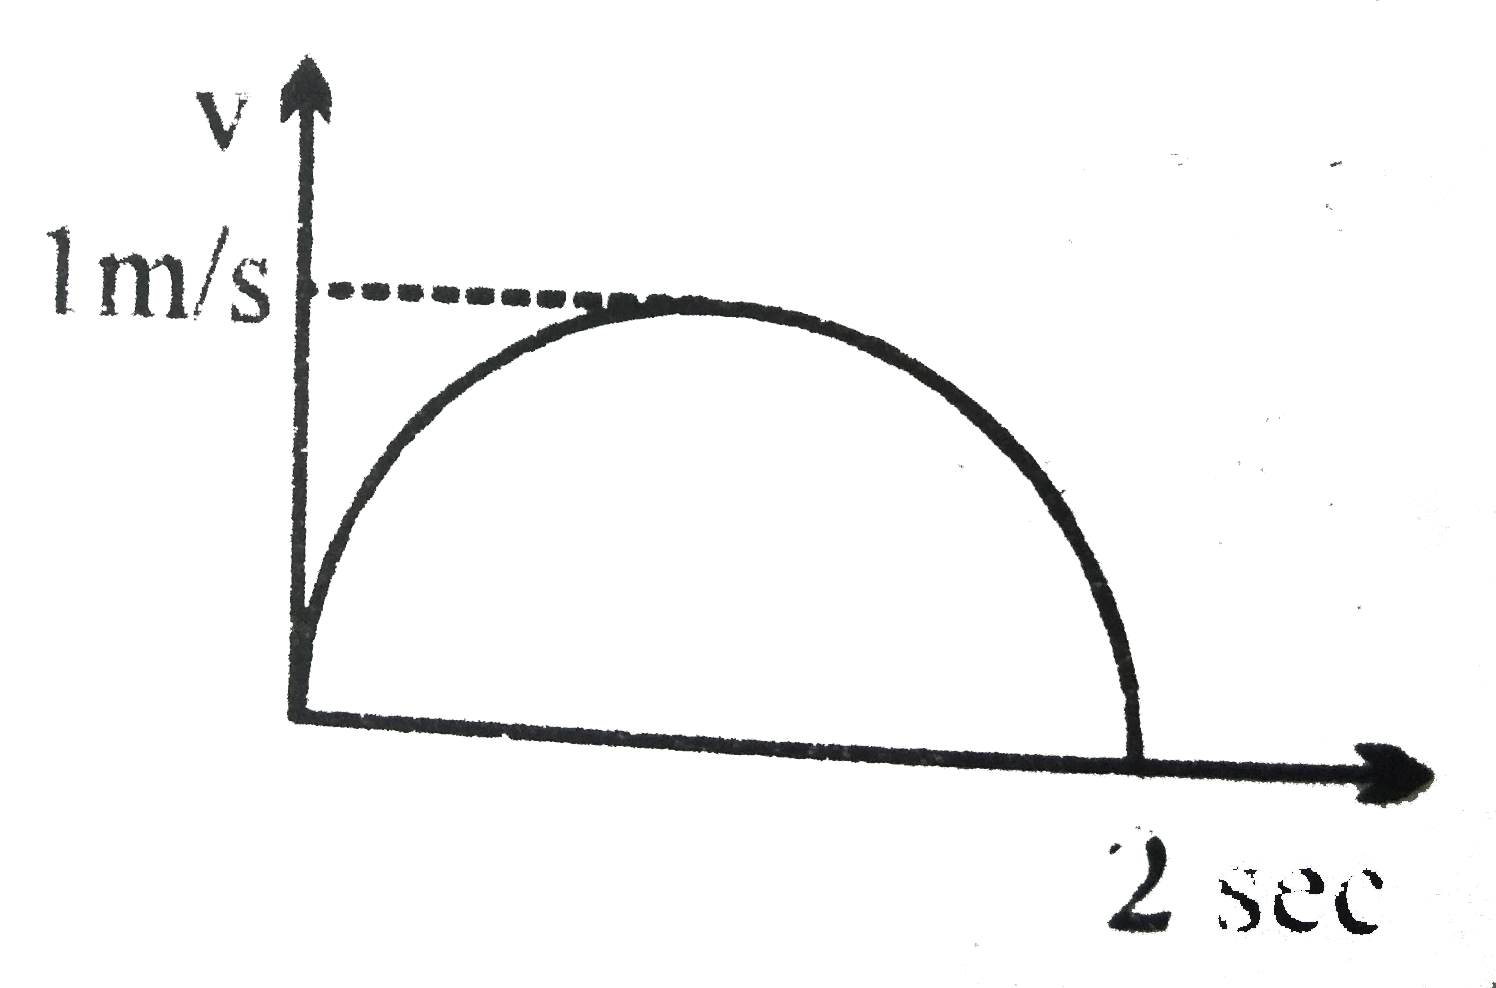 Velocity-time graph for a car is semicircle as shown here. Which of the following is correct: